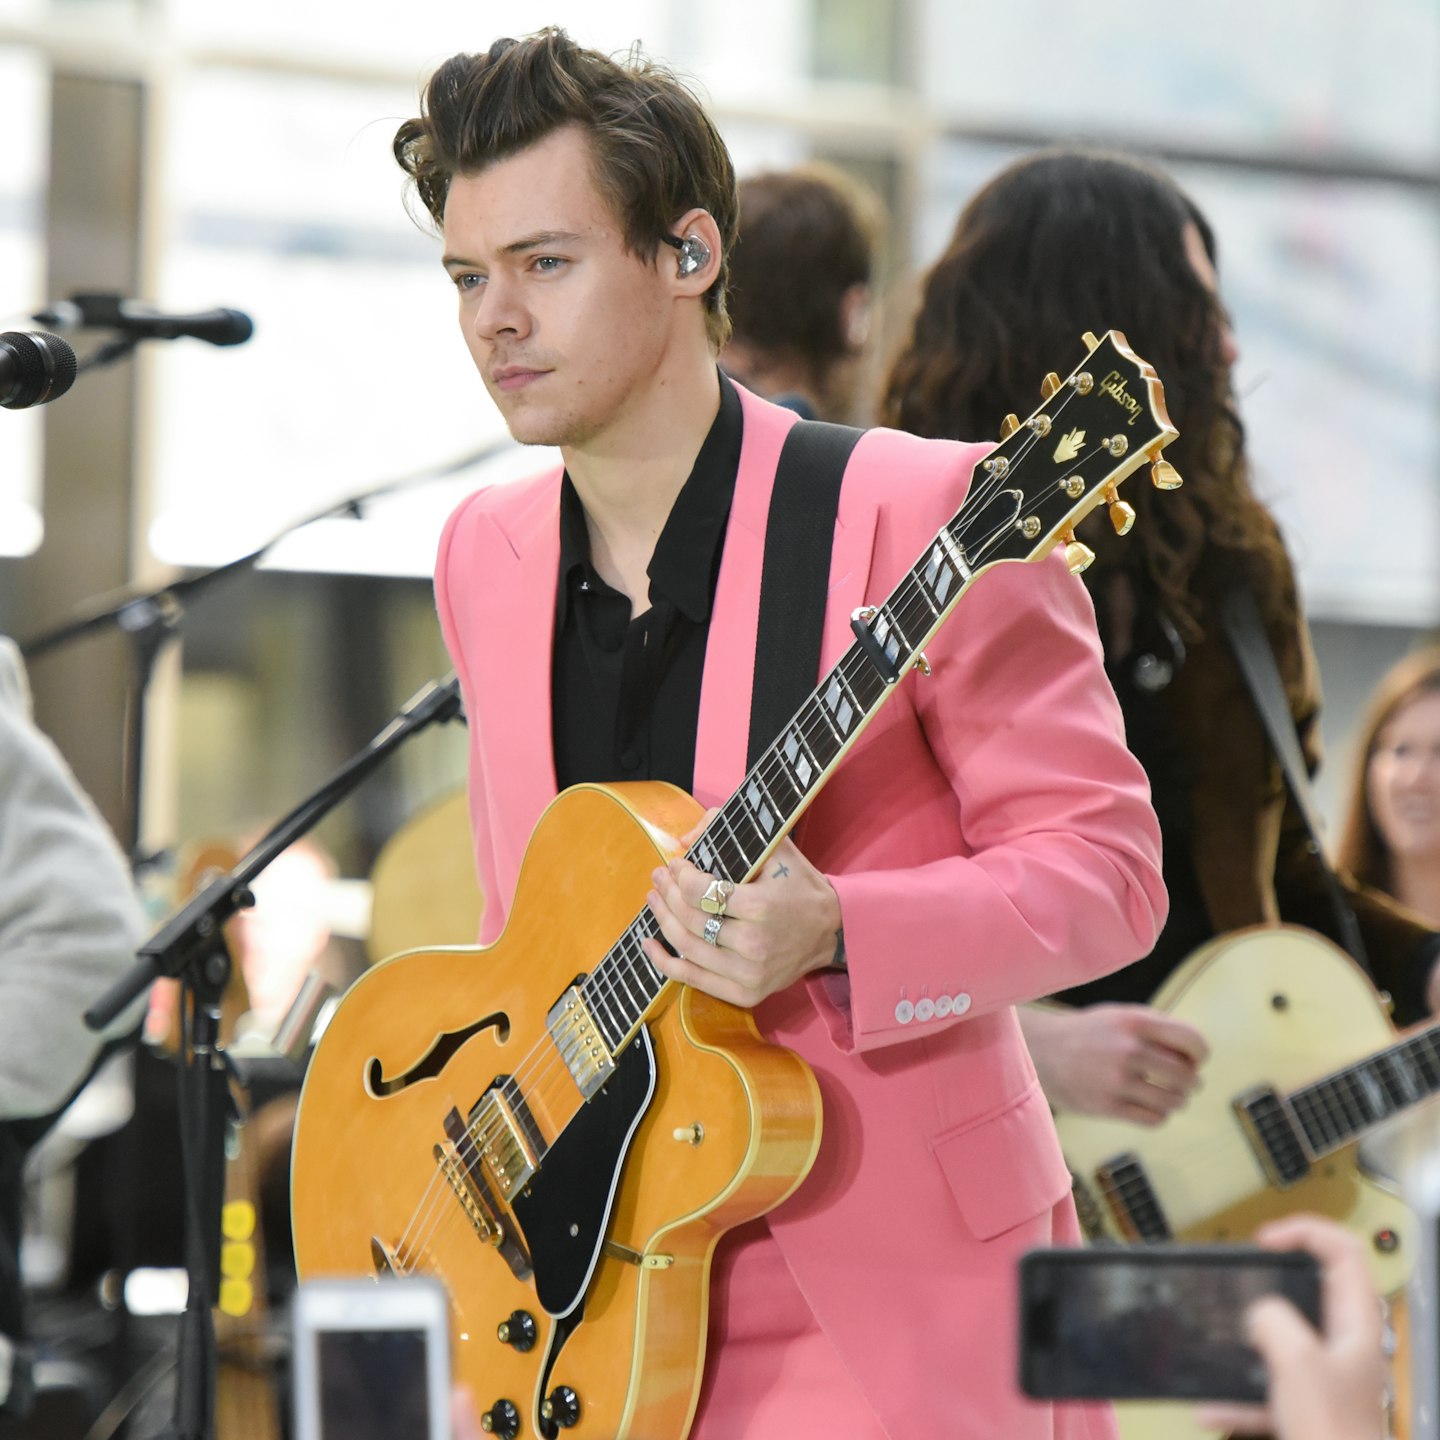 Harry styles Today show